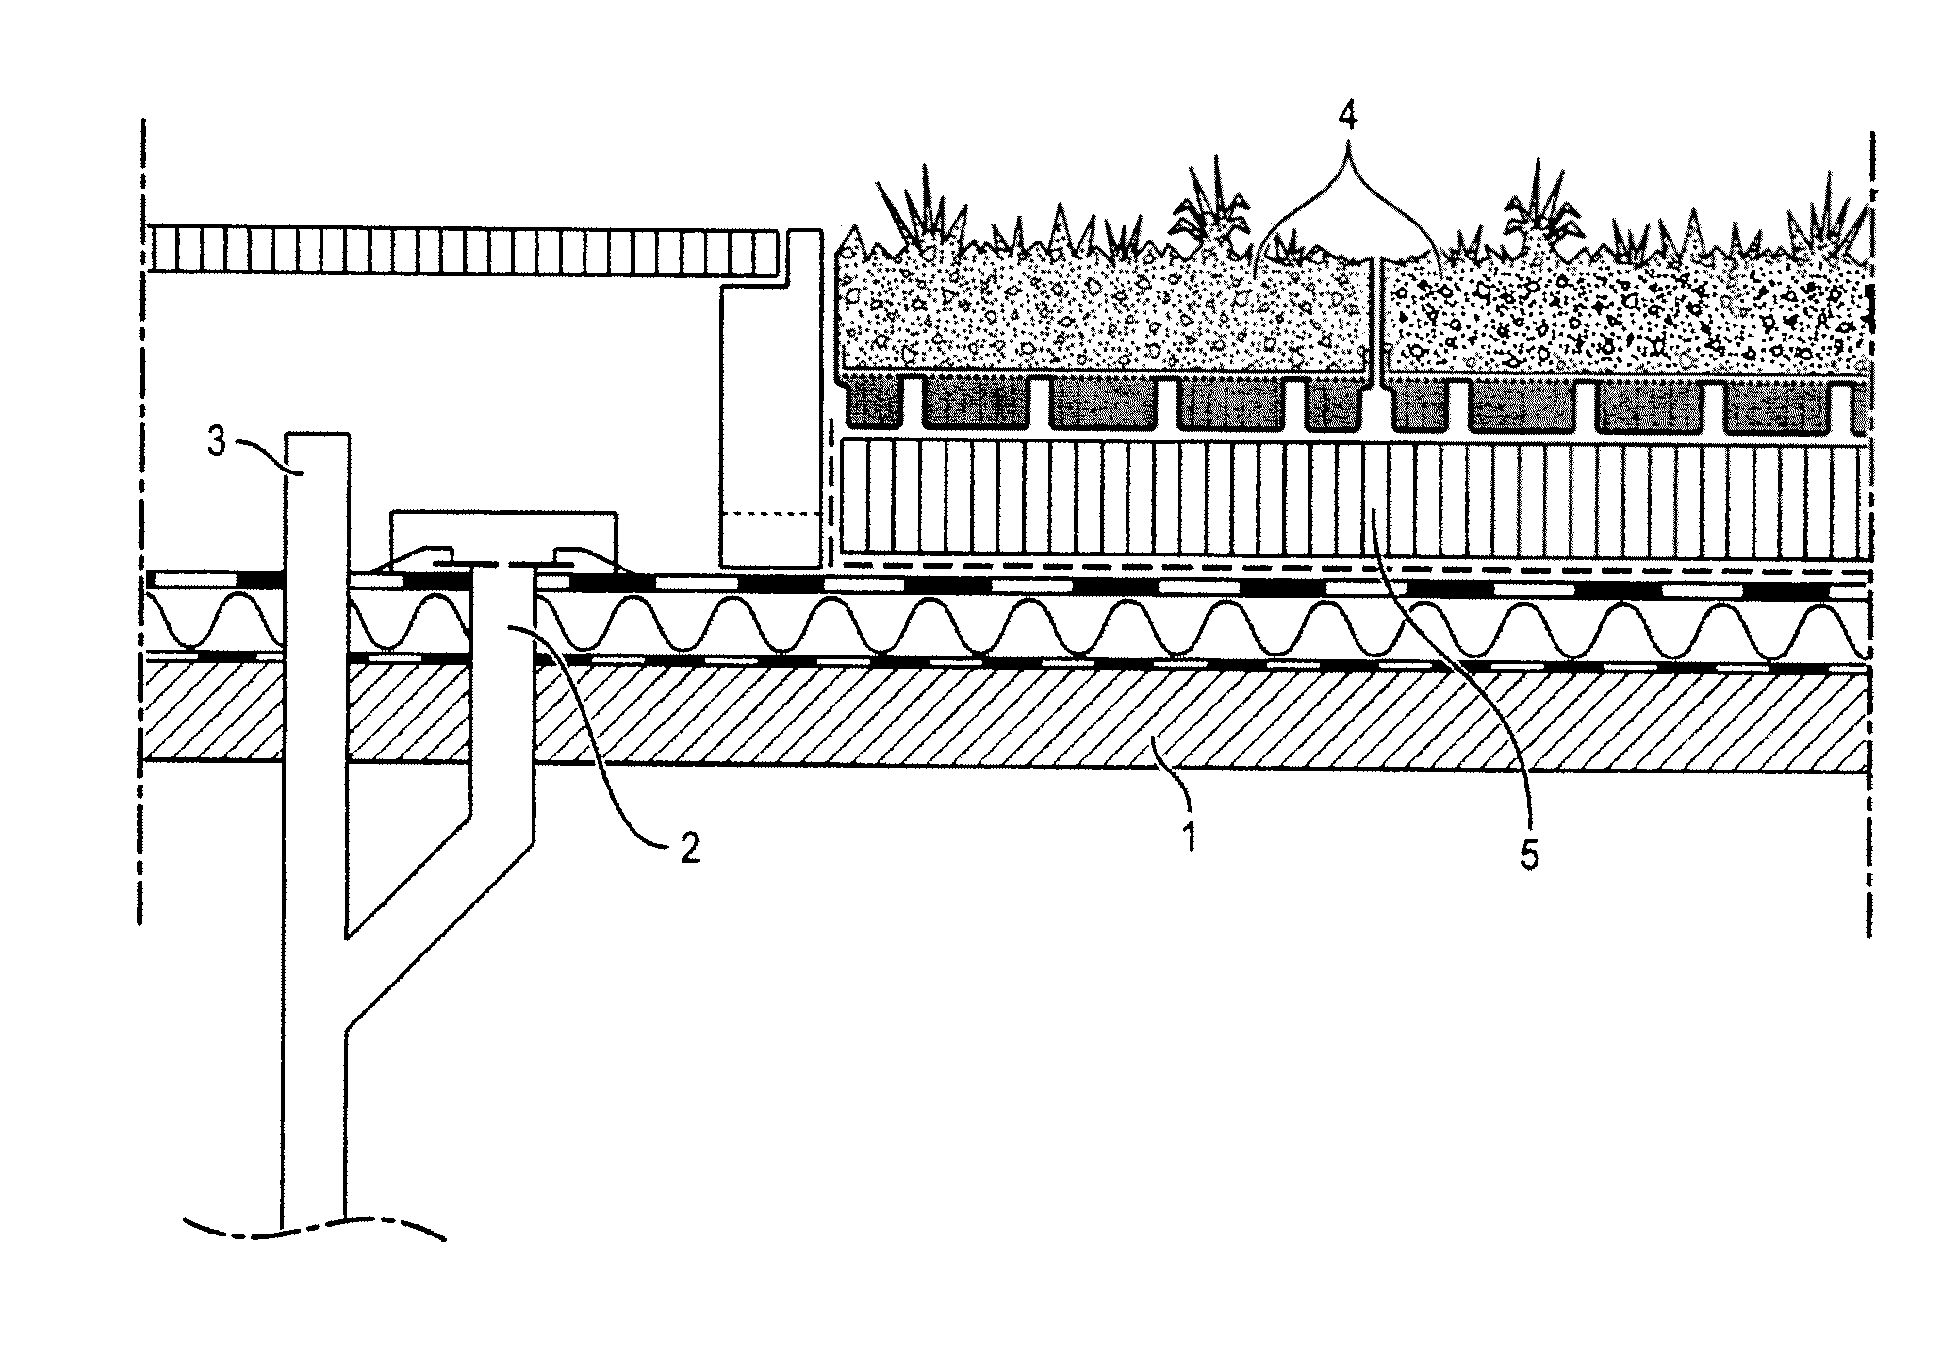 Container for temporarily holding water on the roof of a building with a controlled leakage rate